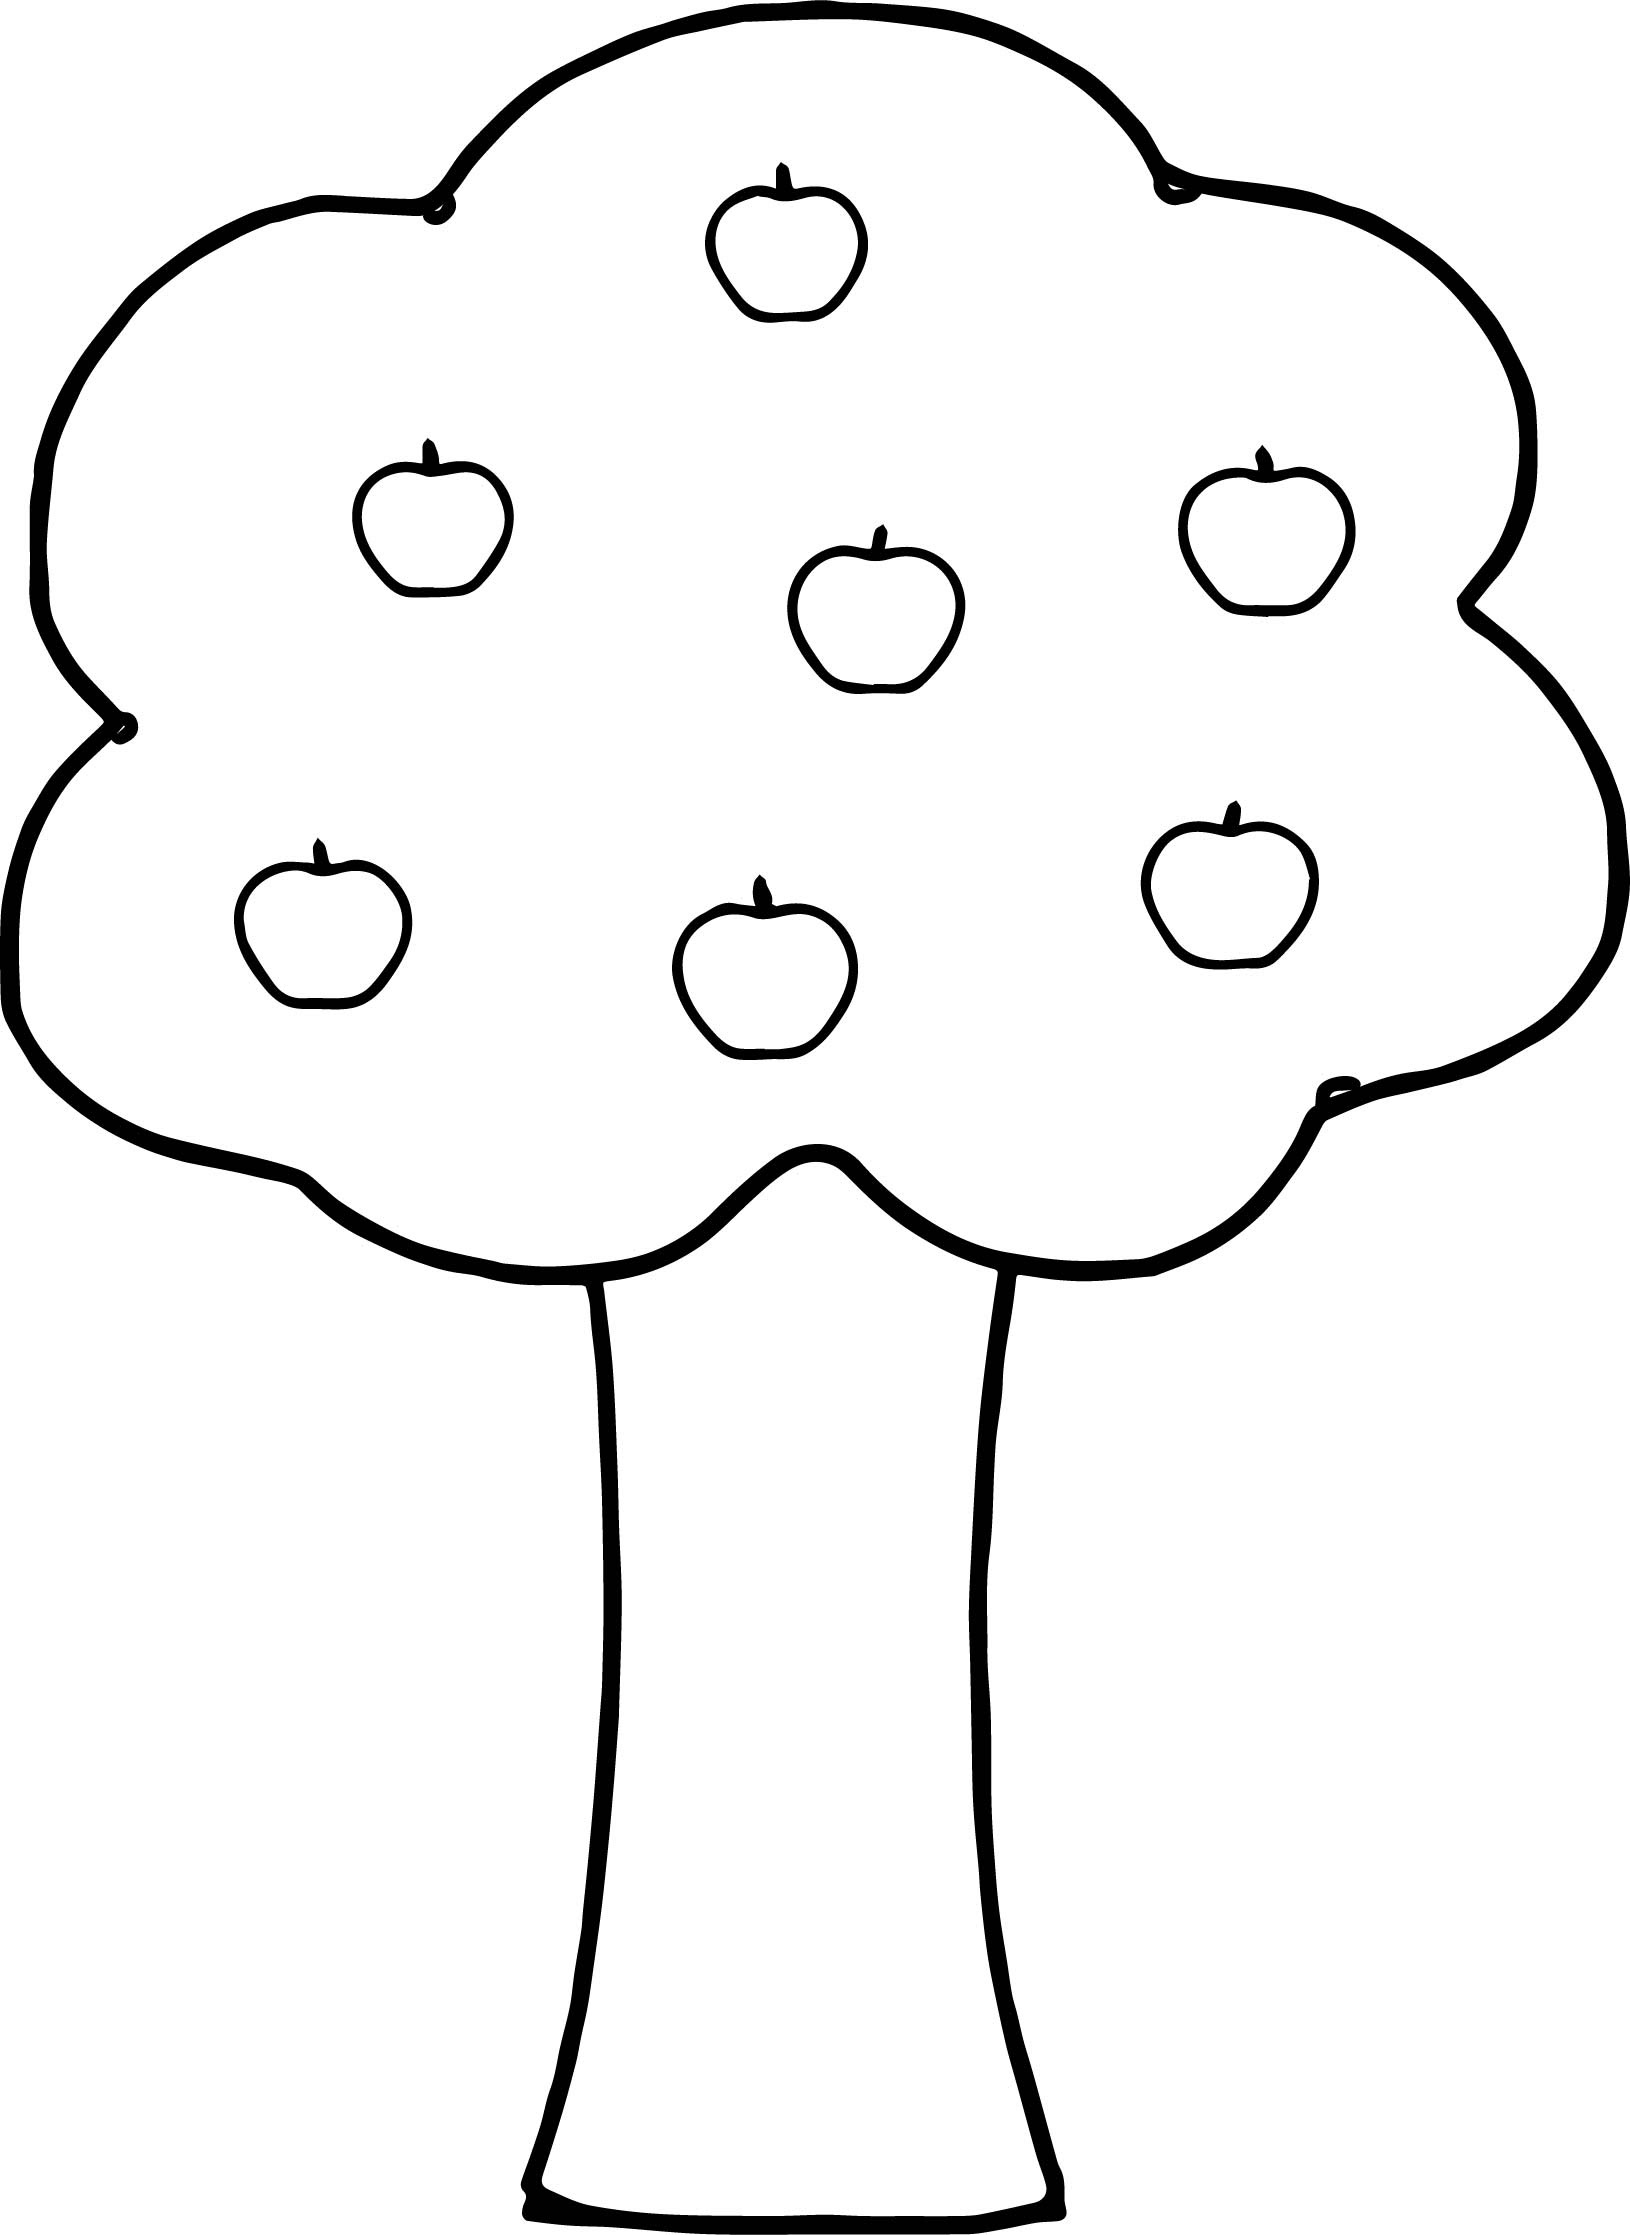 Colouring Pages Of Apple Tree - Coloring Pages